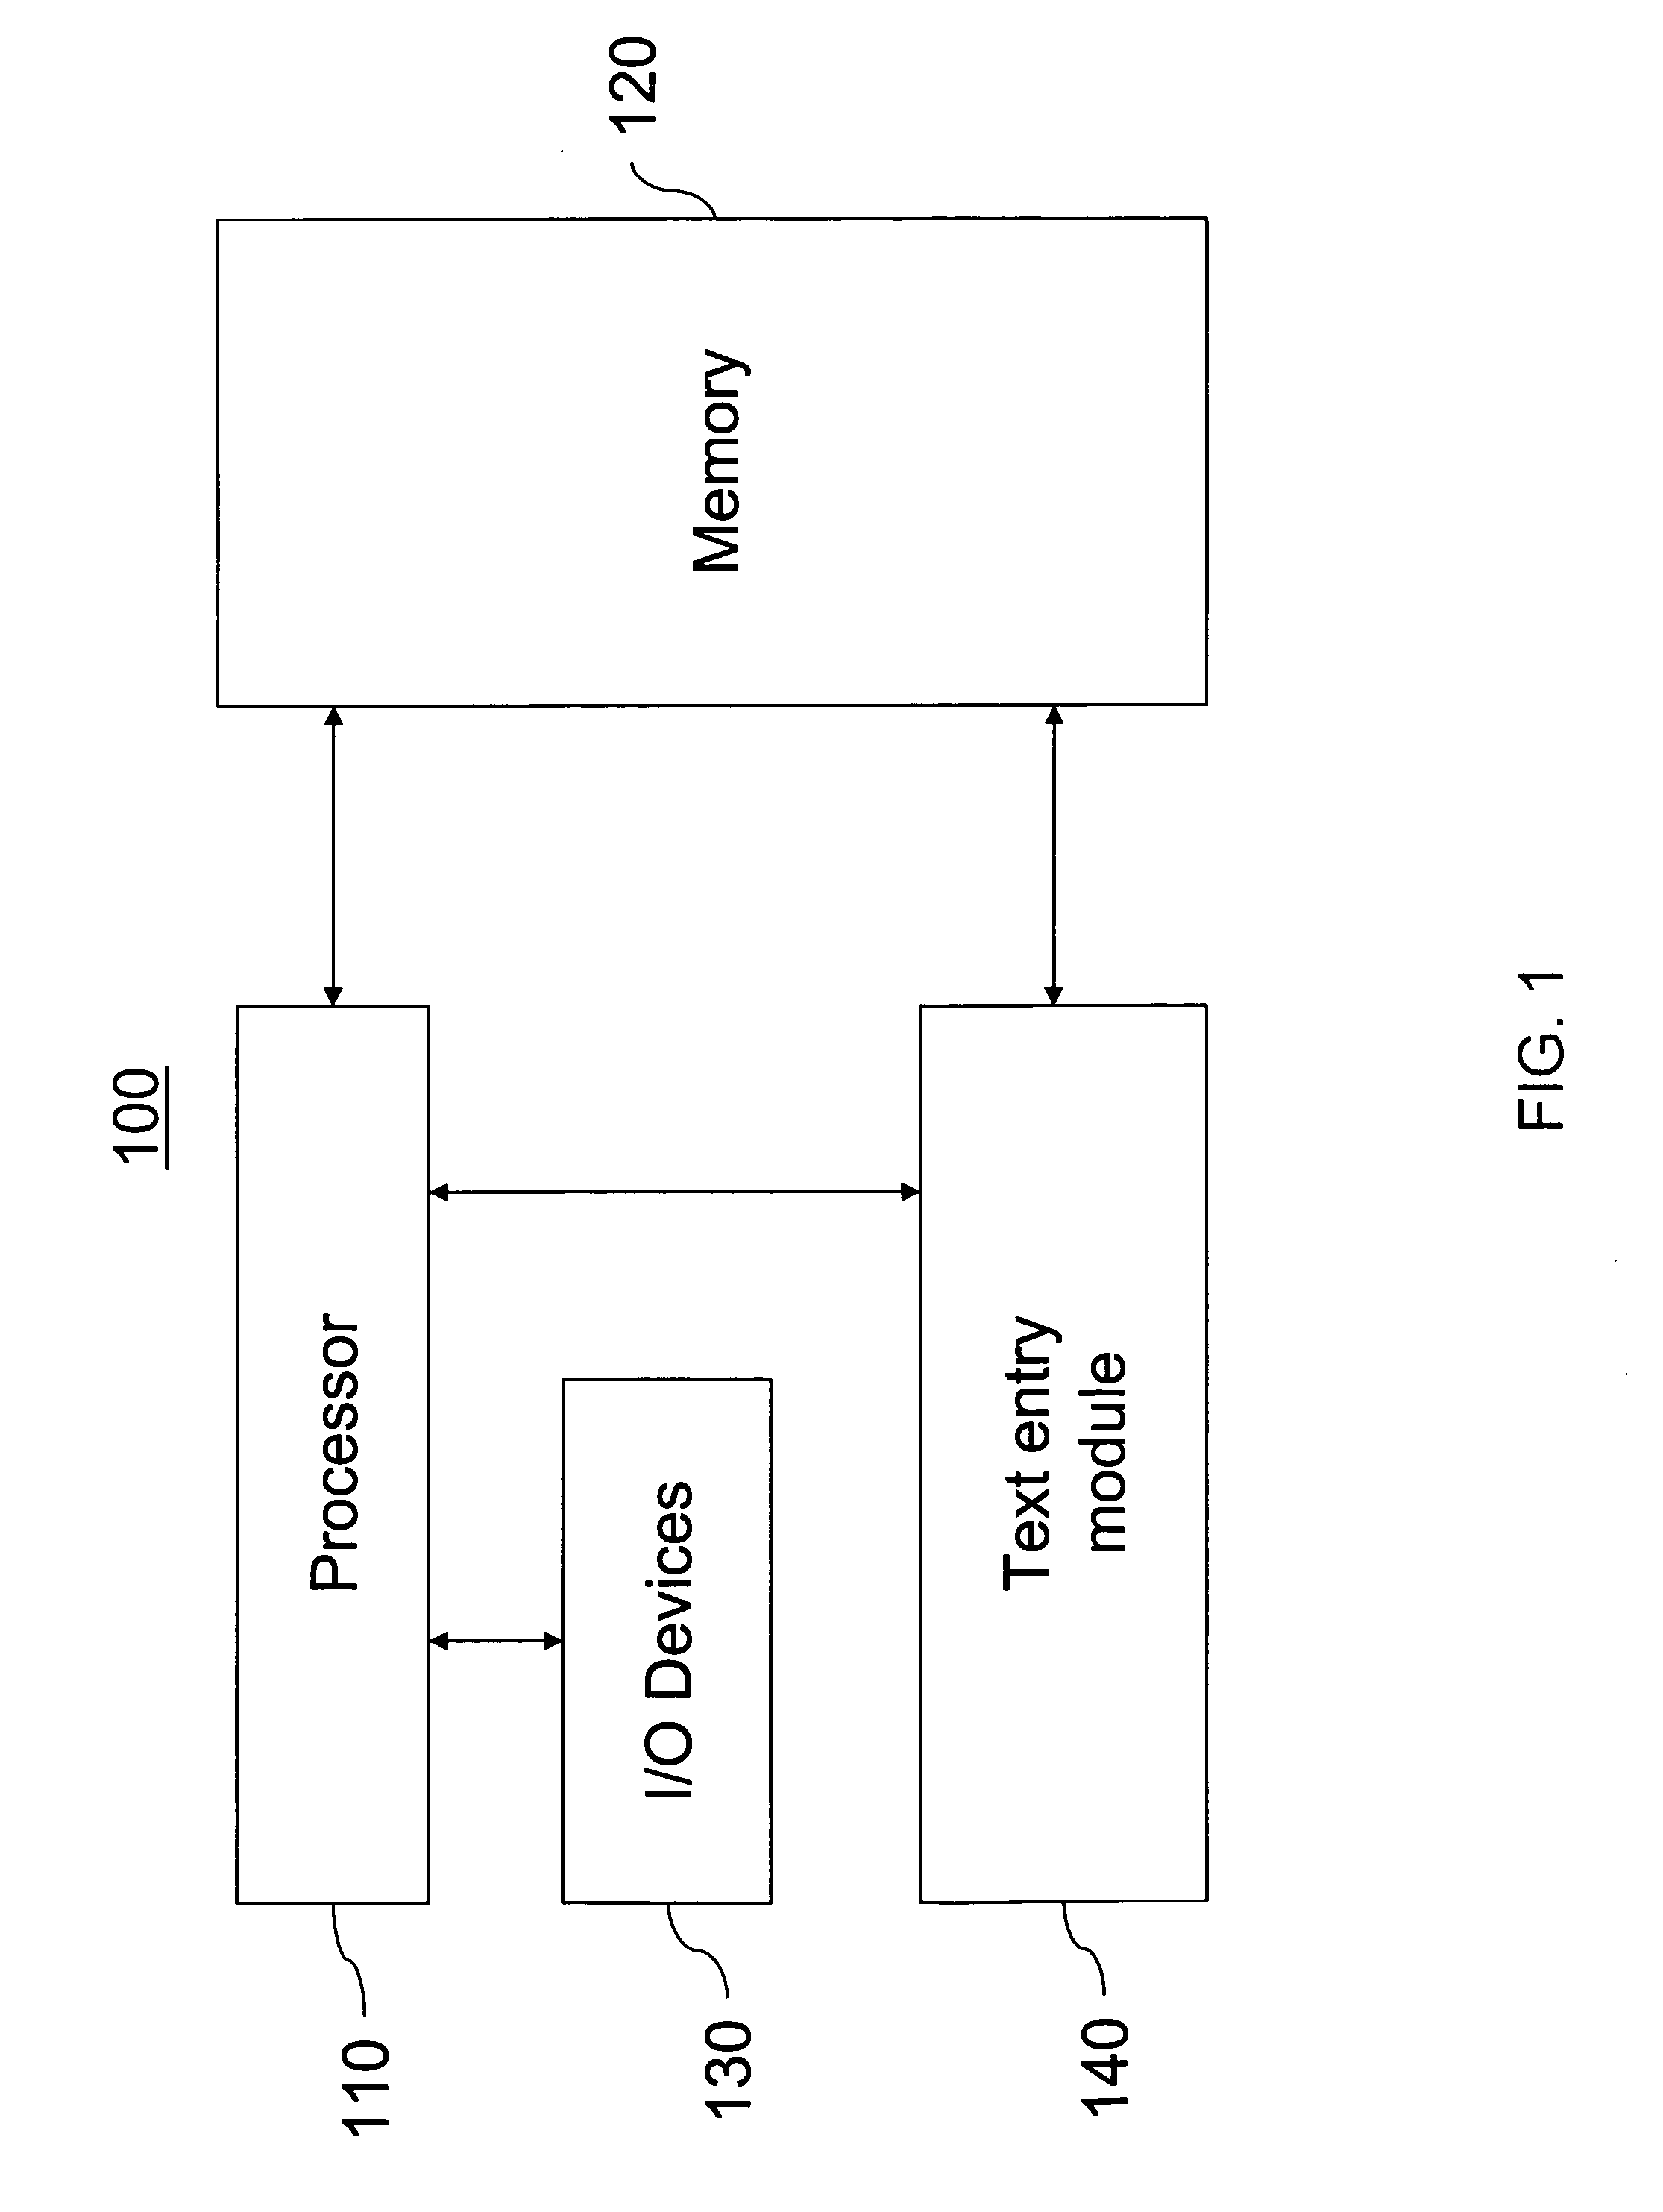 Apparatus and method for providing non-tactile text entry